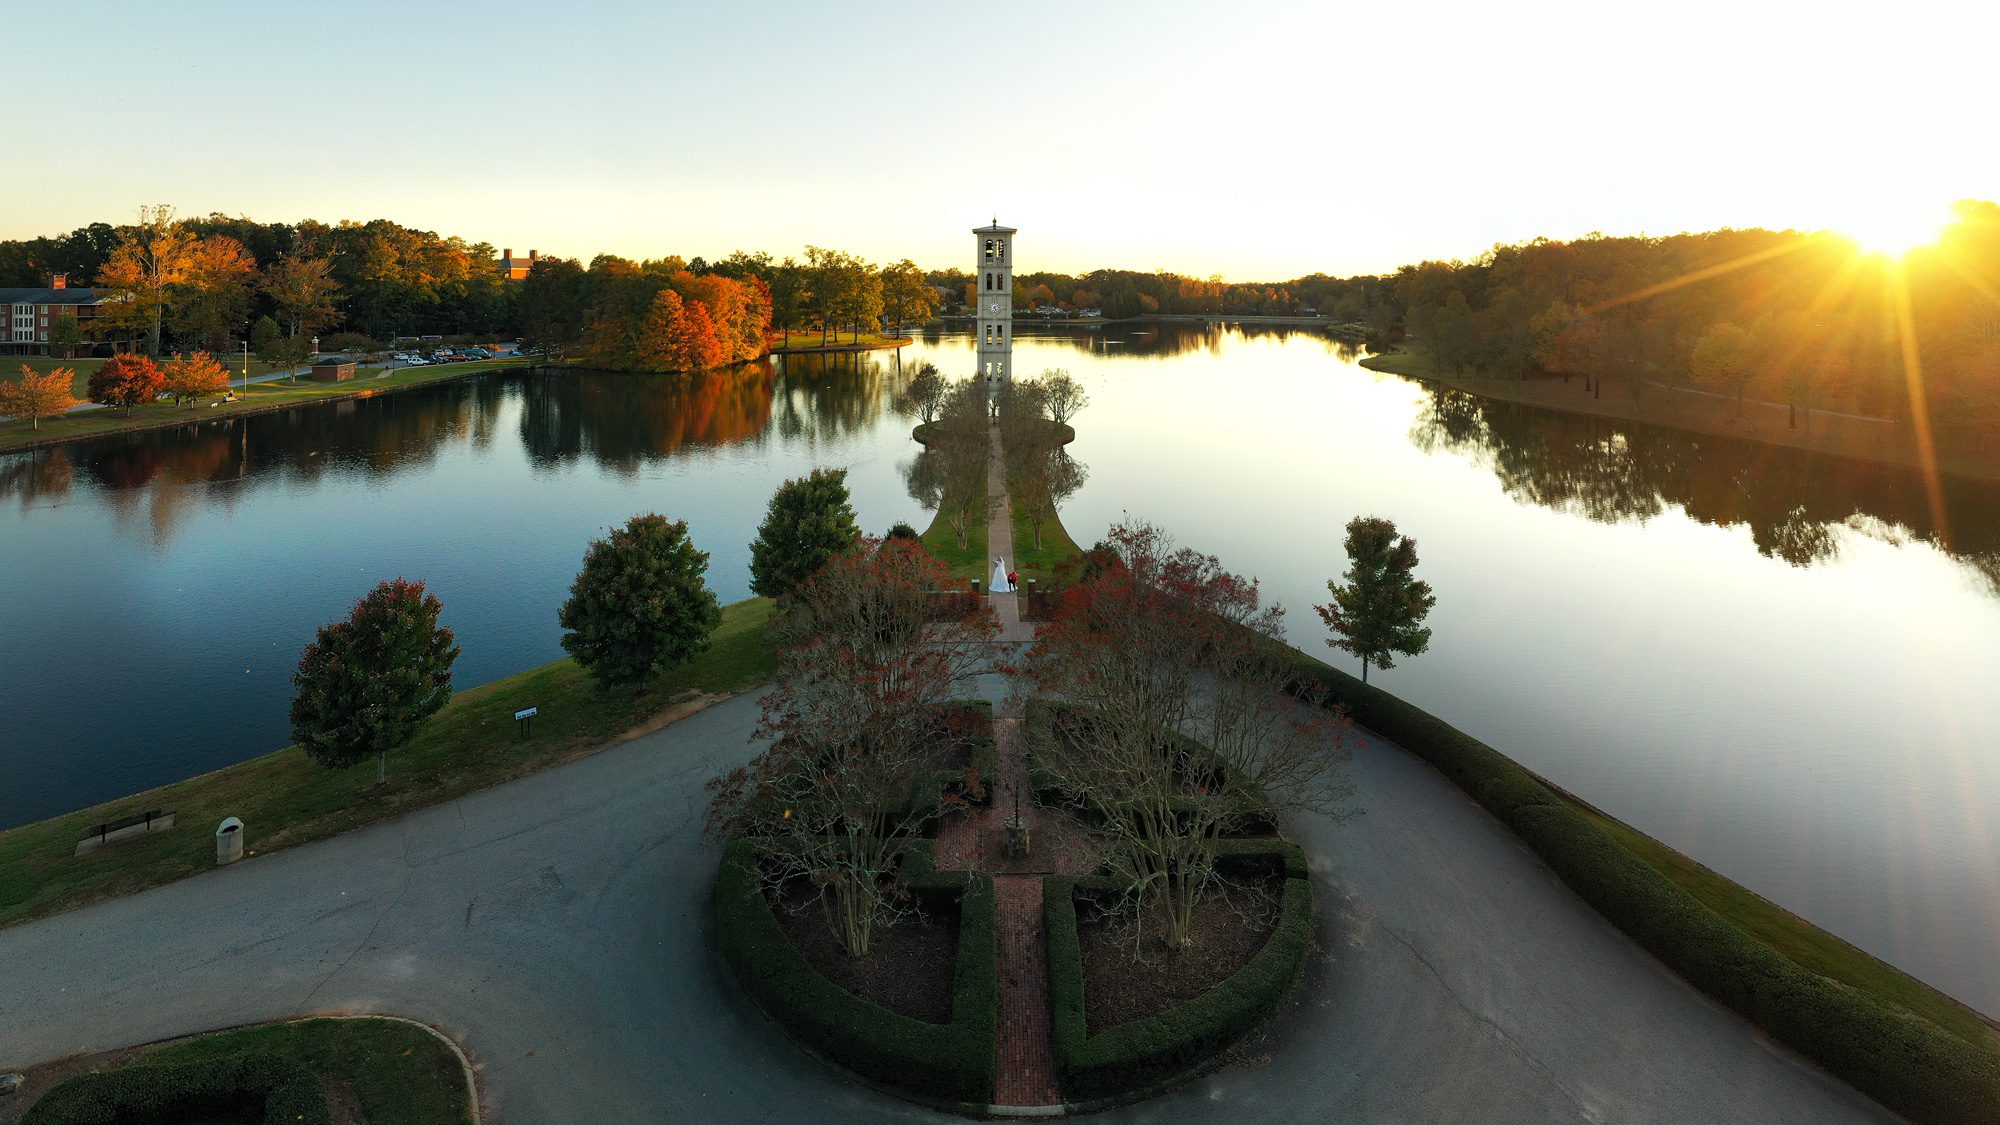 Sunset over the lake, bell tower in distance